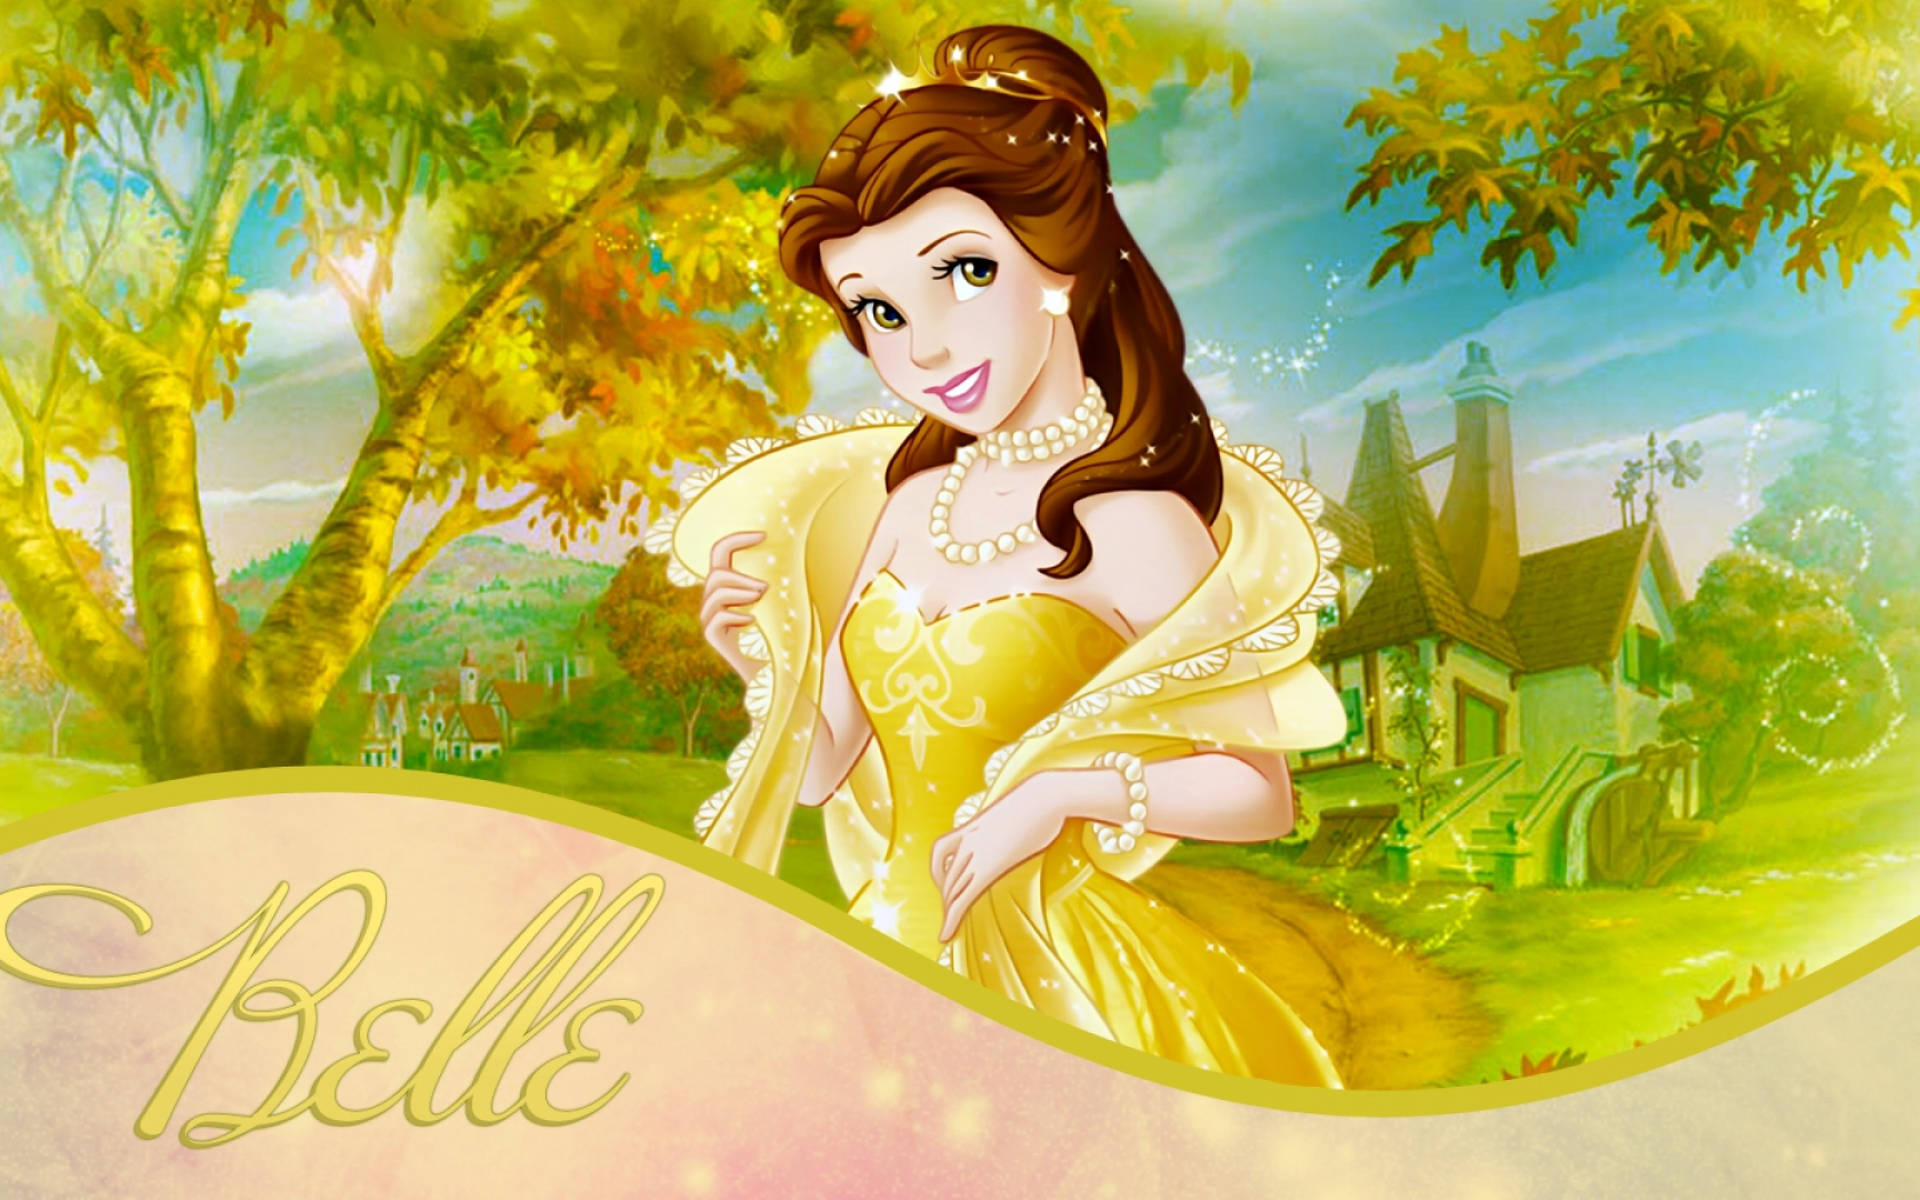 Belle With Yellow Dress Background